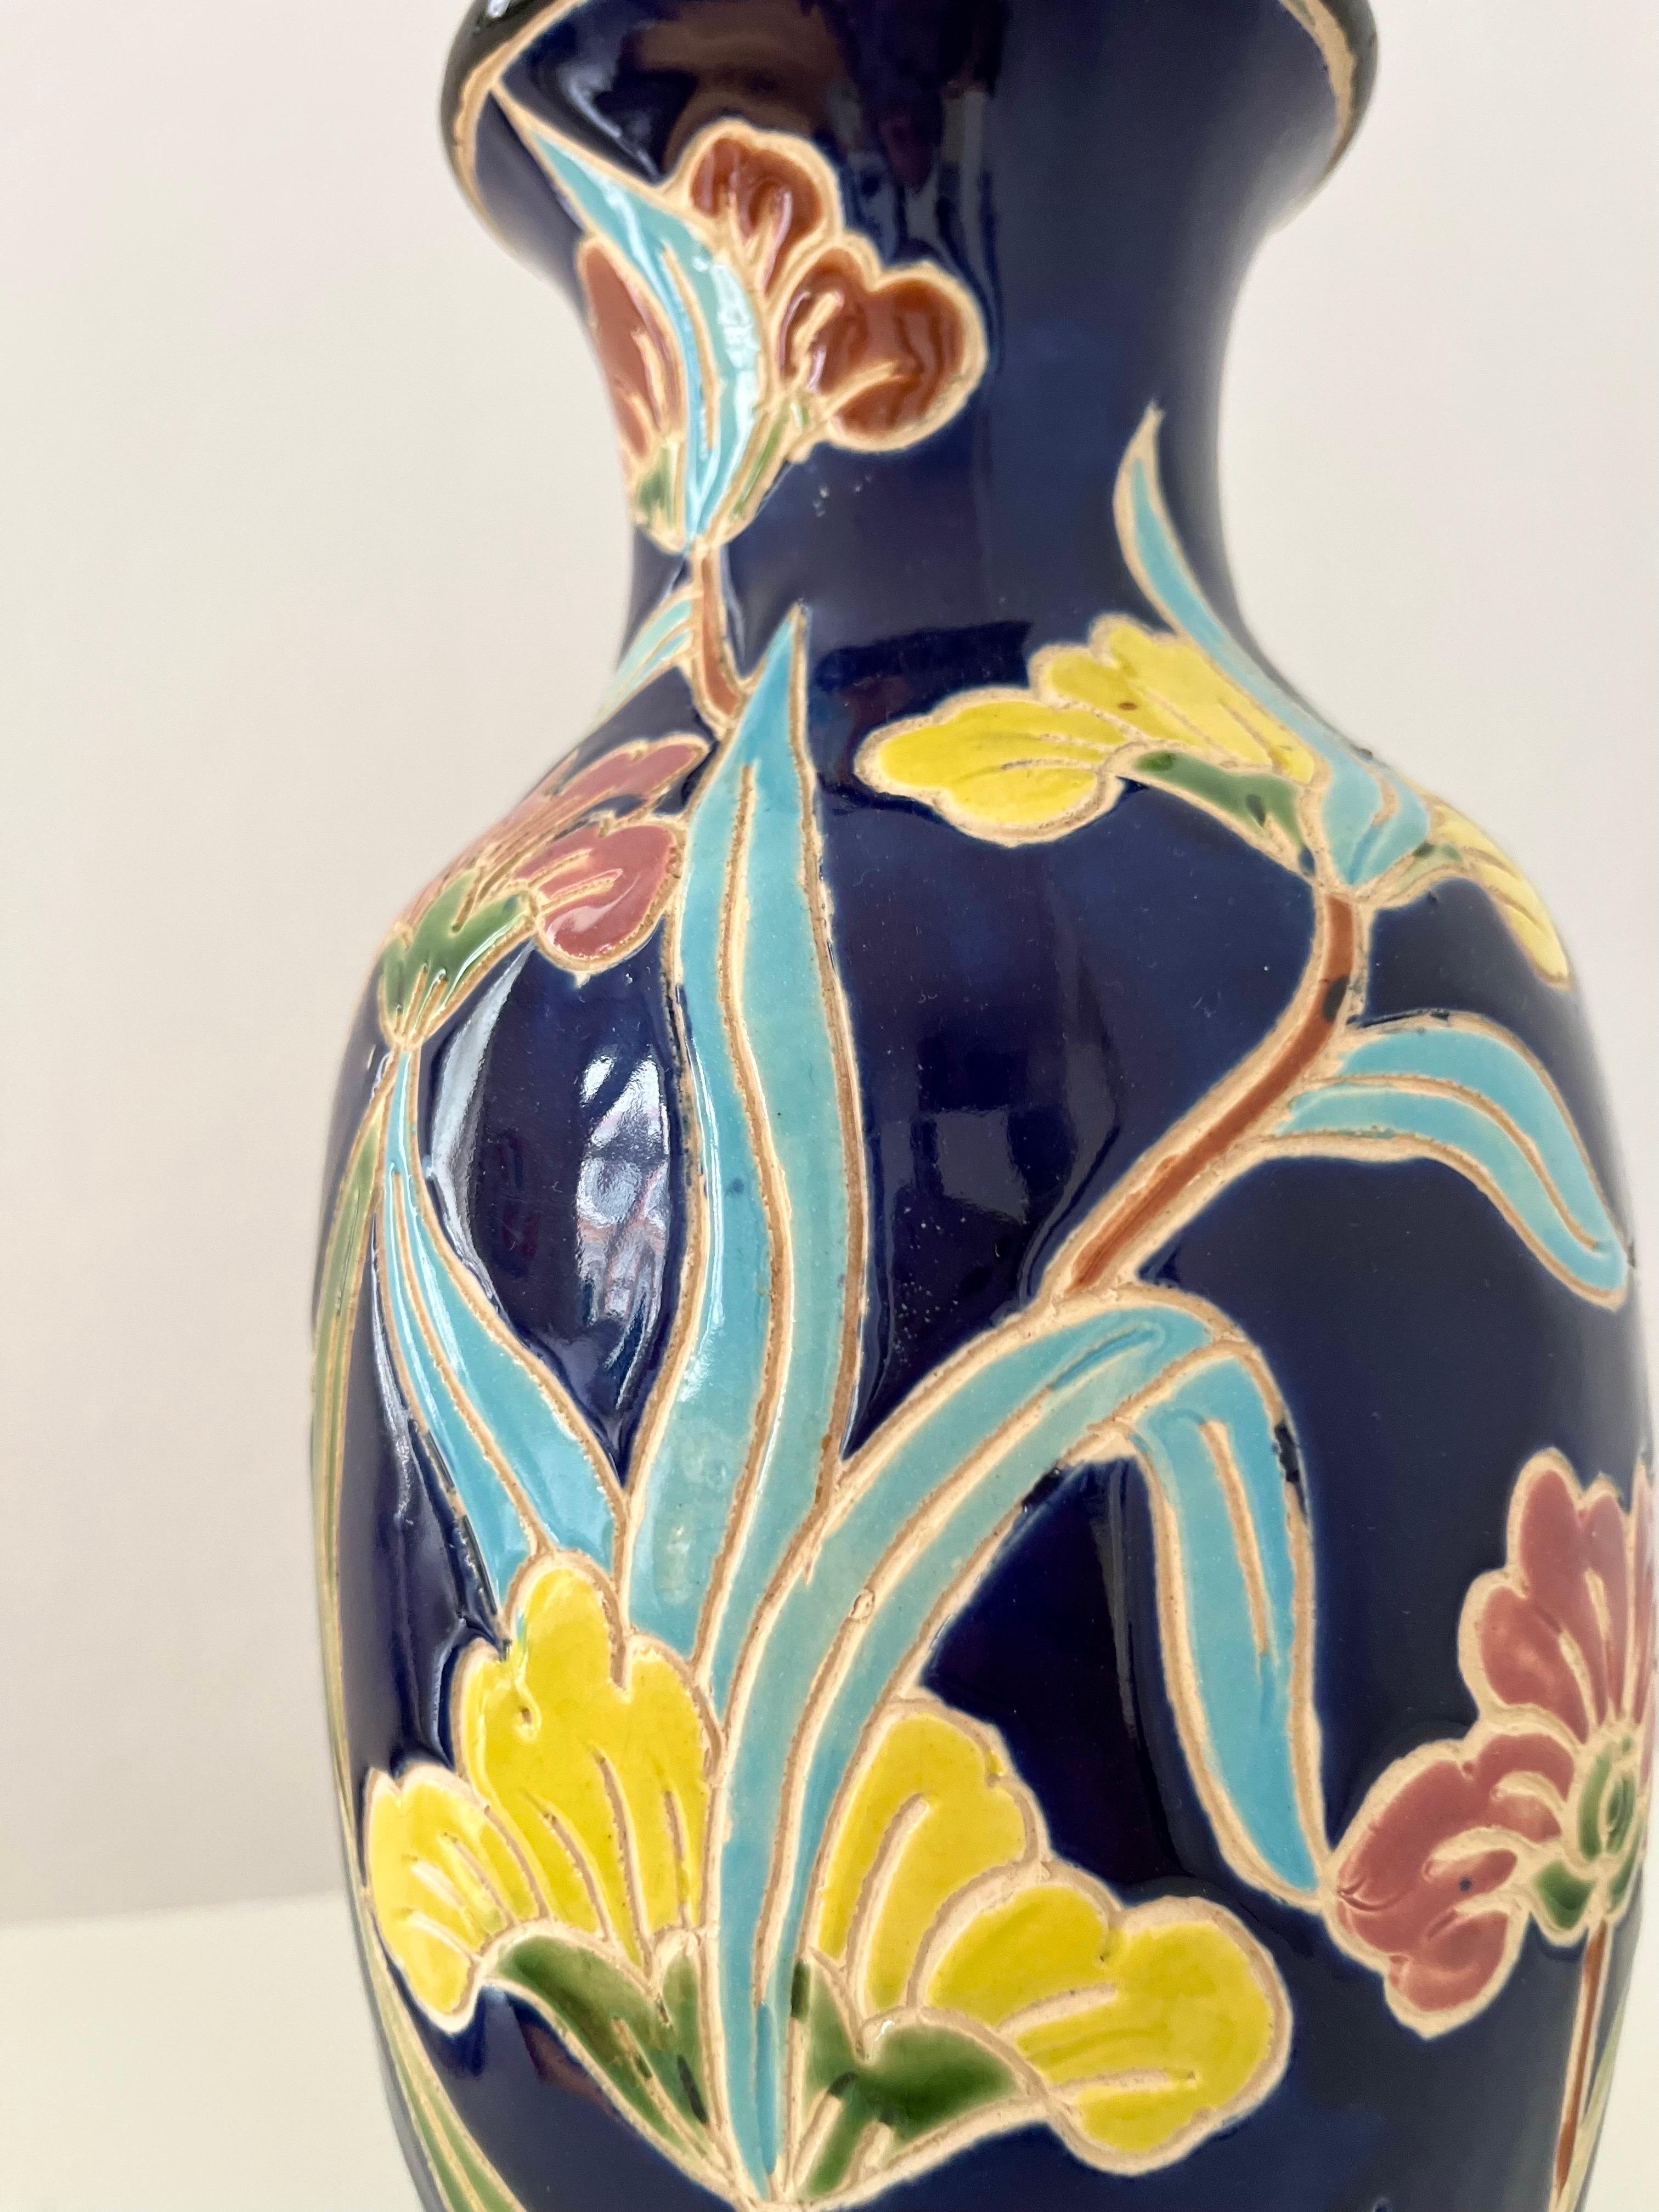 1960s/1970s Scandinavian Organic Modern Ceramic Vase with Colorful Floral Motifs For Sale 7